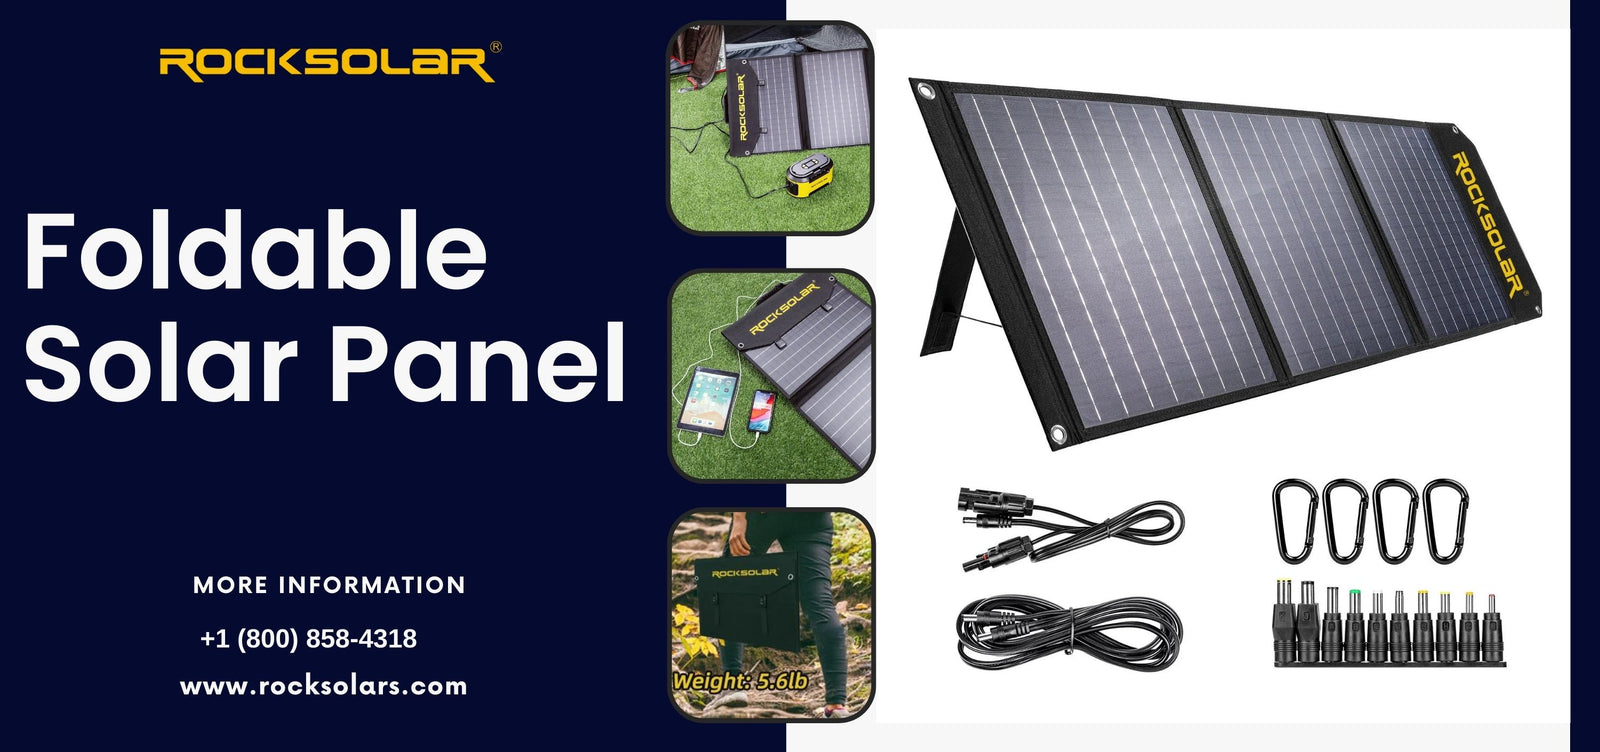 How to use portable solar panels